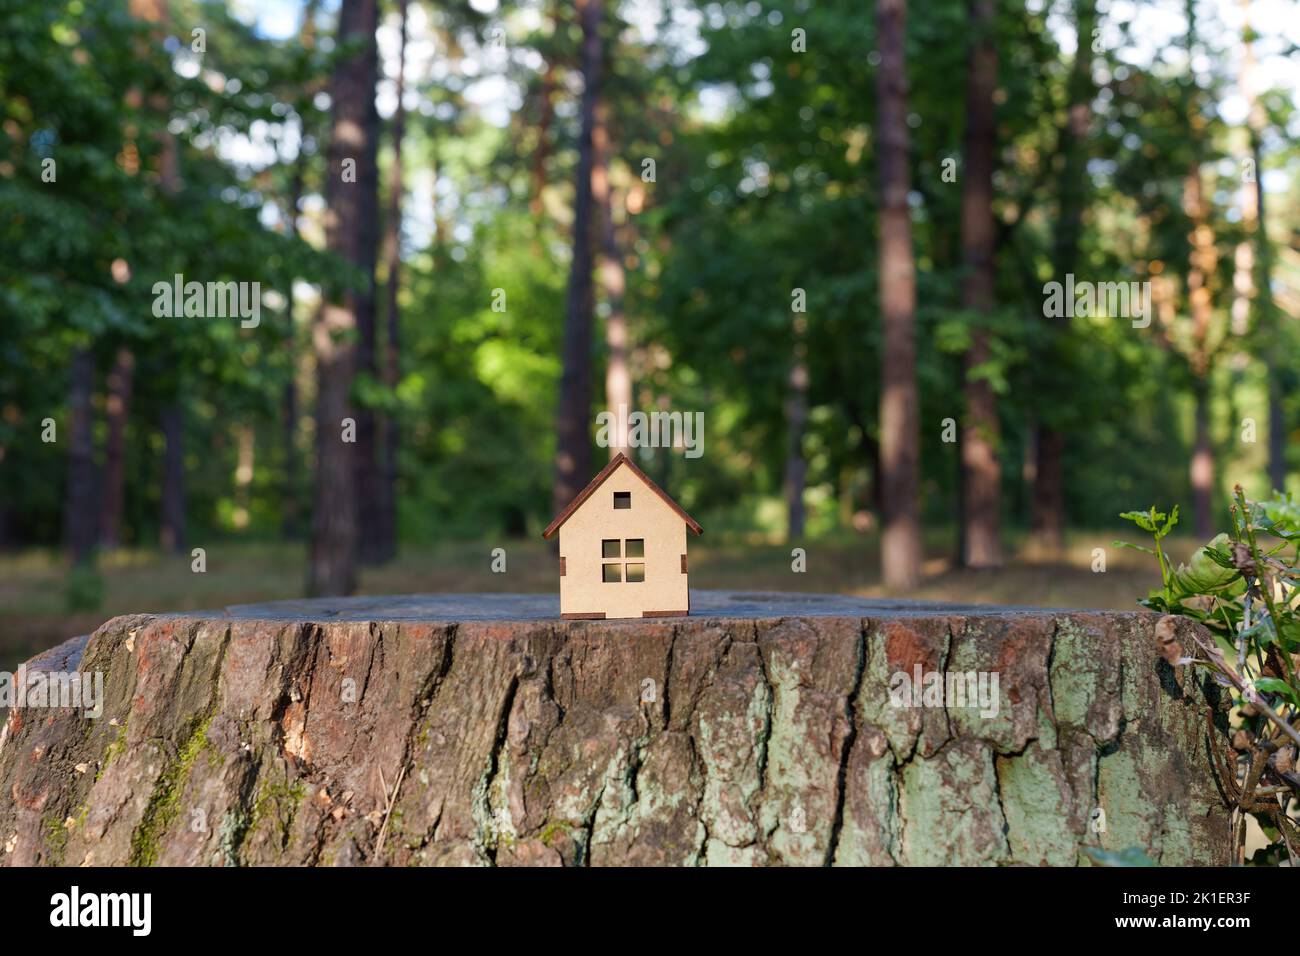 Small wooden toy house model placed on a large tree stump in the forest. Nature and real estate concept. Housing effecting deforestation. Stock Photo